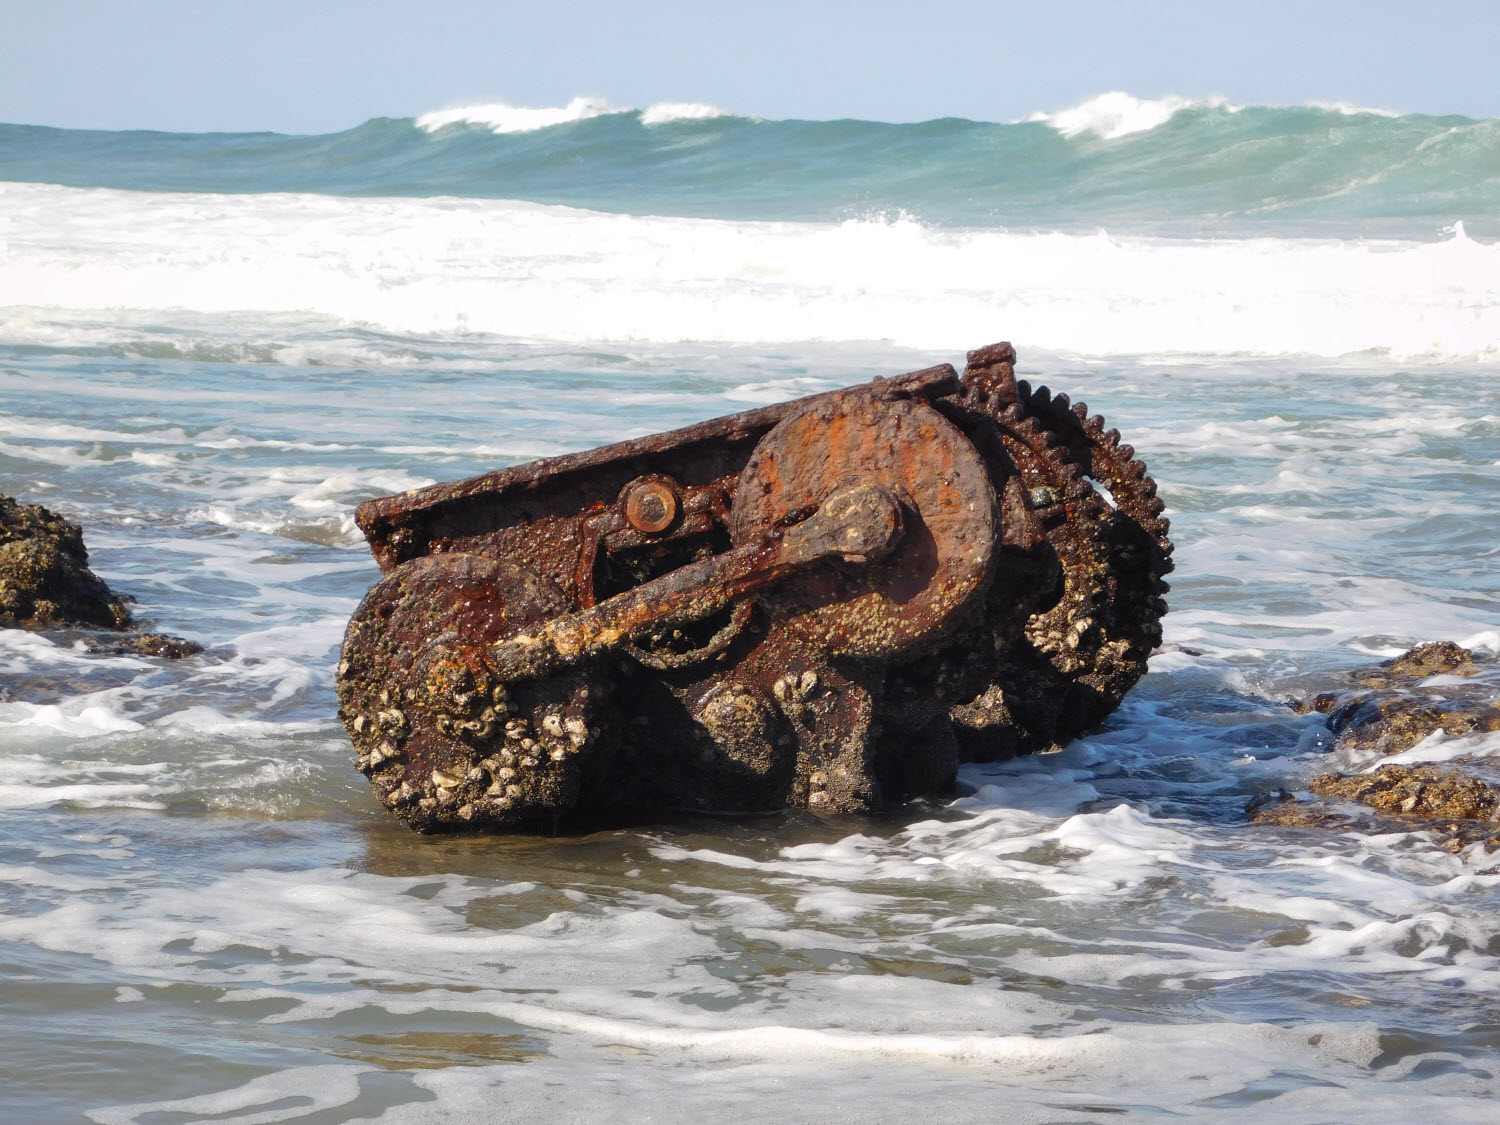 SS Nivonia, South African Whaler wrecked in July 1935 on the Kwazulu-Natal South Coast.